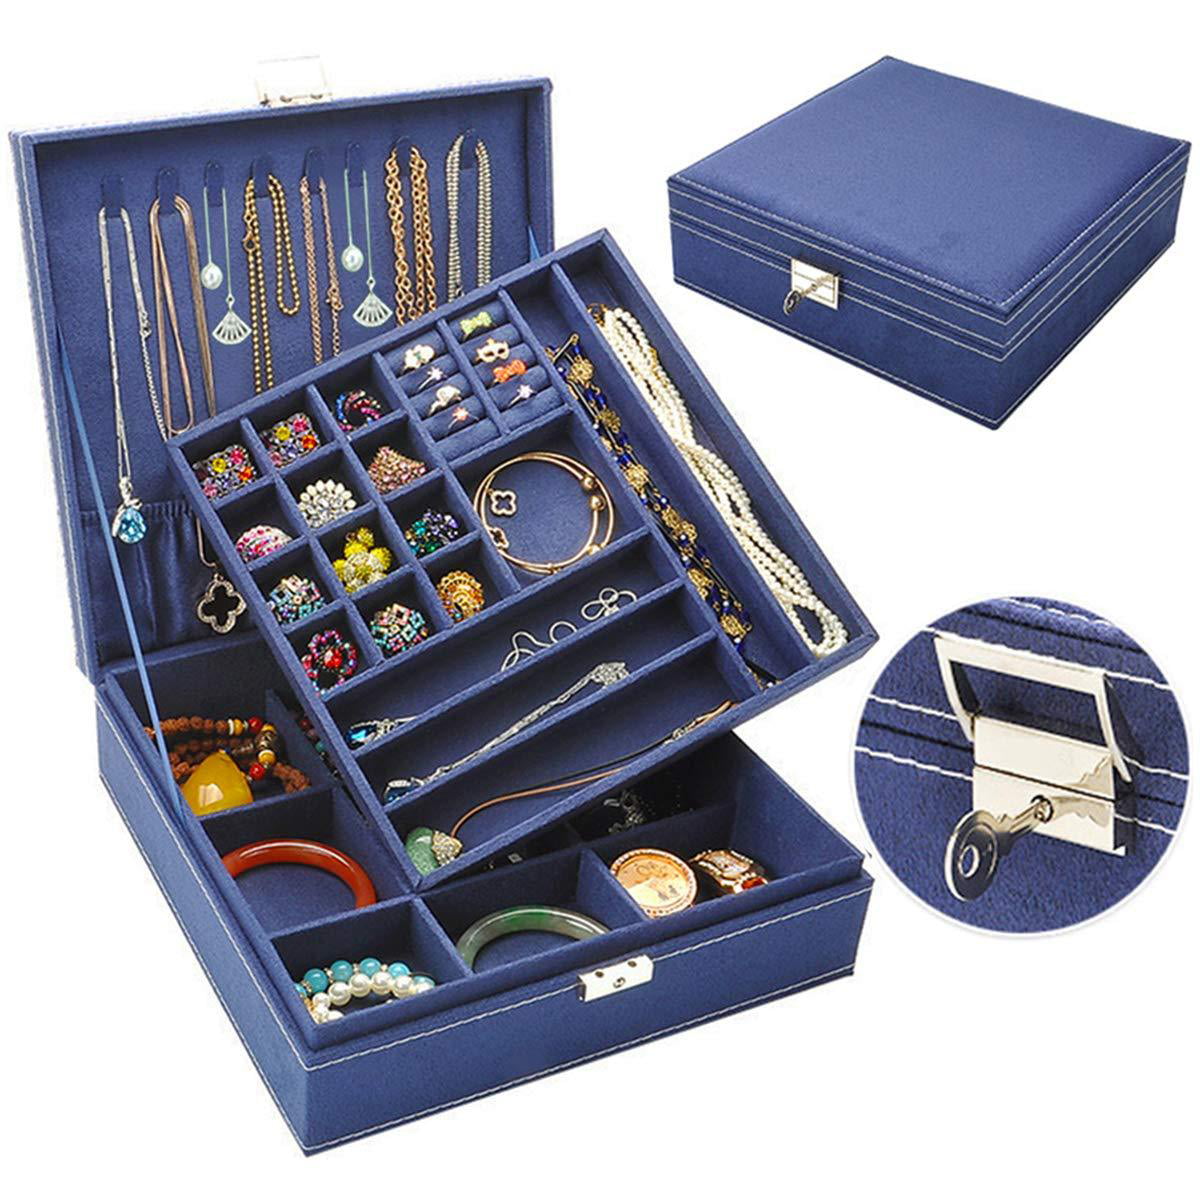 Double Layer 36 Compartments Necklace Jewelry Organizer with Lock Jewelry Holder for Earrings Bracelets Rings Double Layer-Sky Blue Jewelry Box for Women